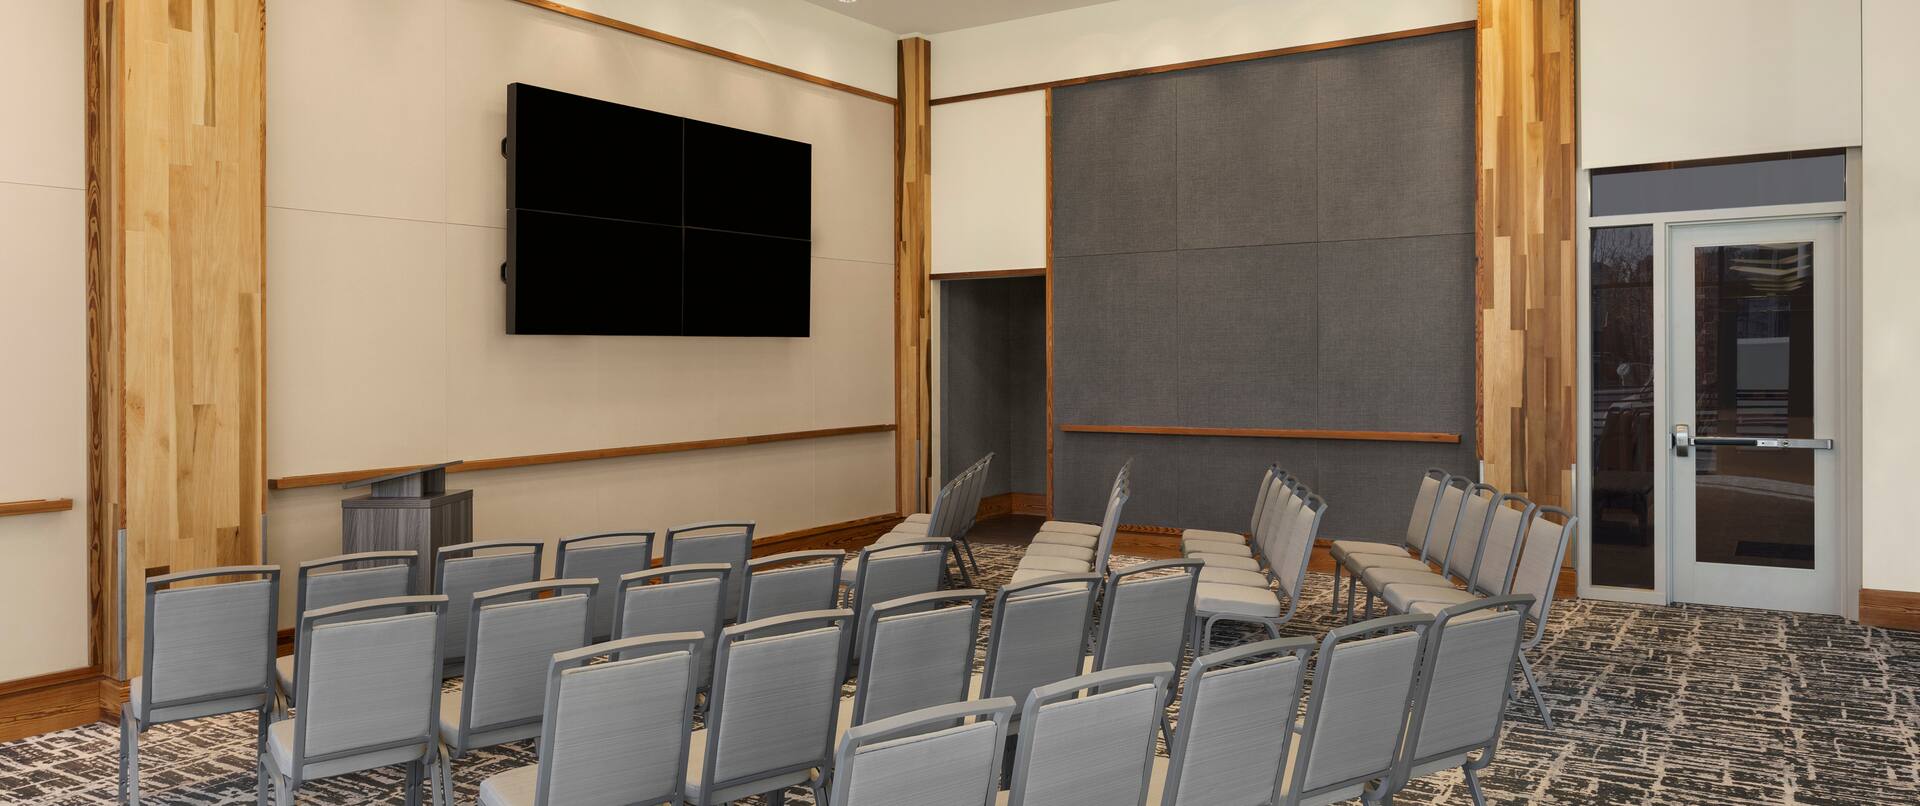 Theater Set Up Meeting Room